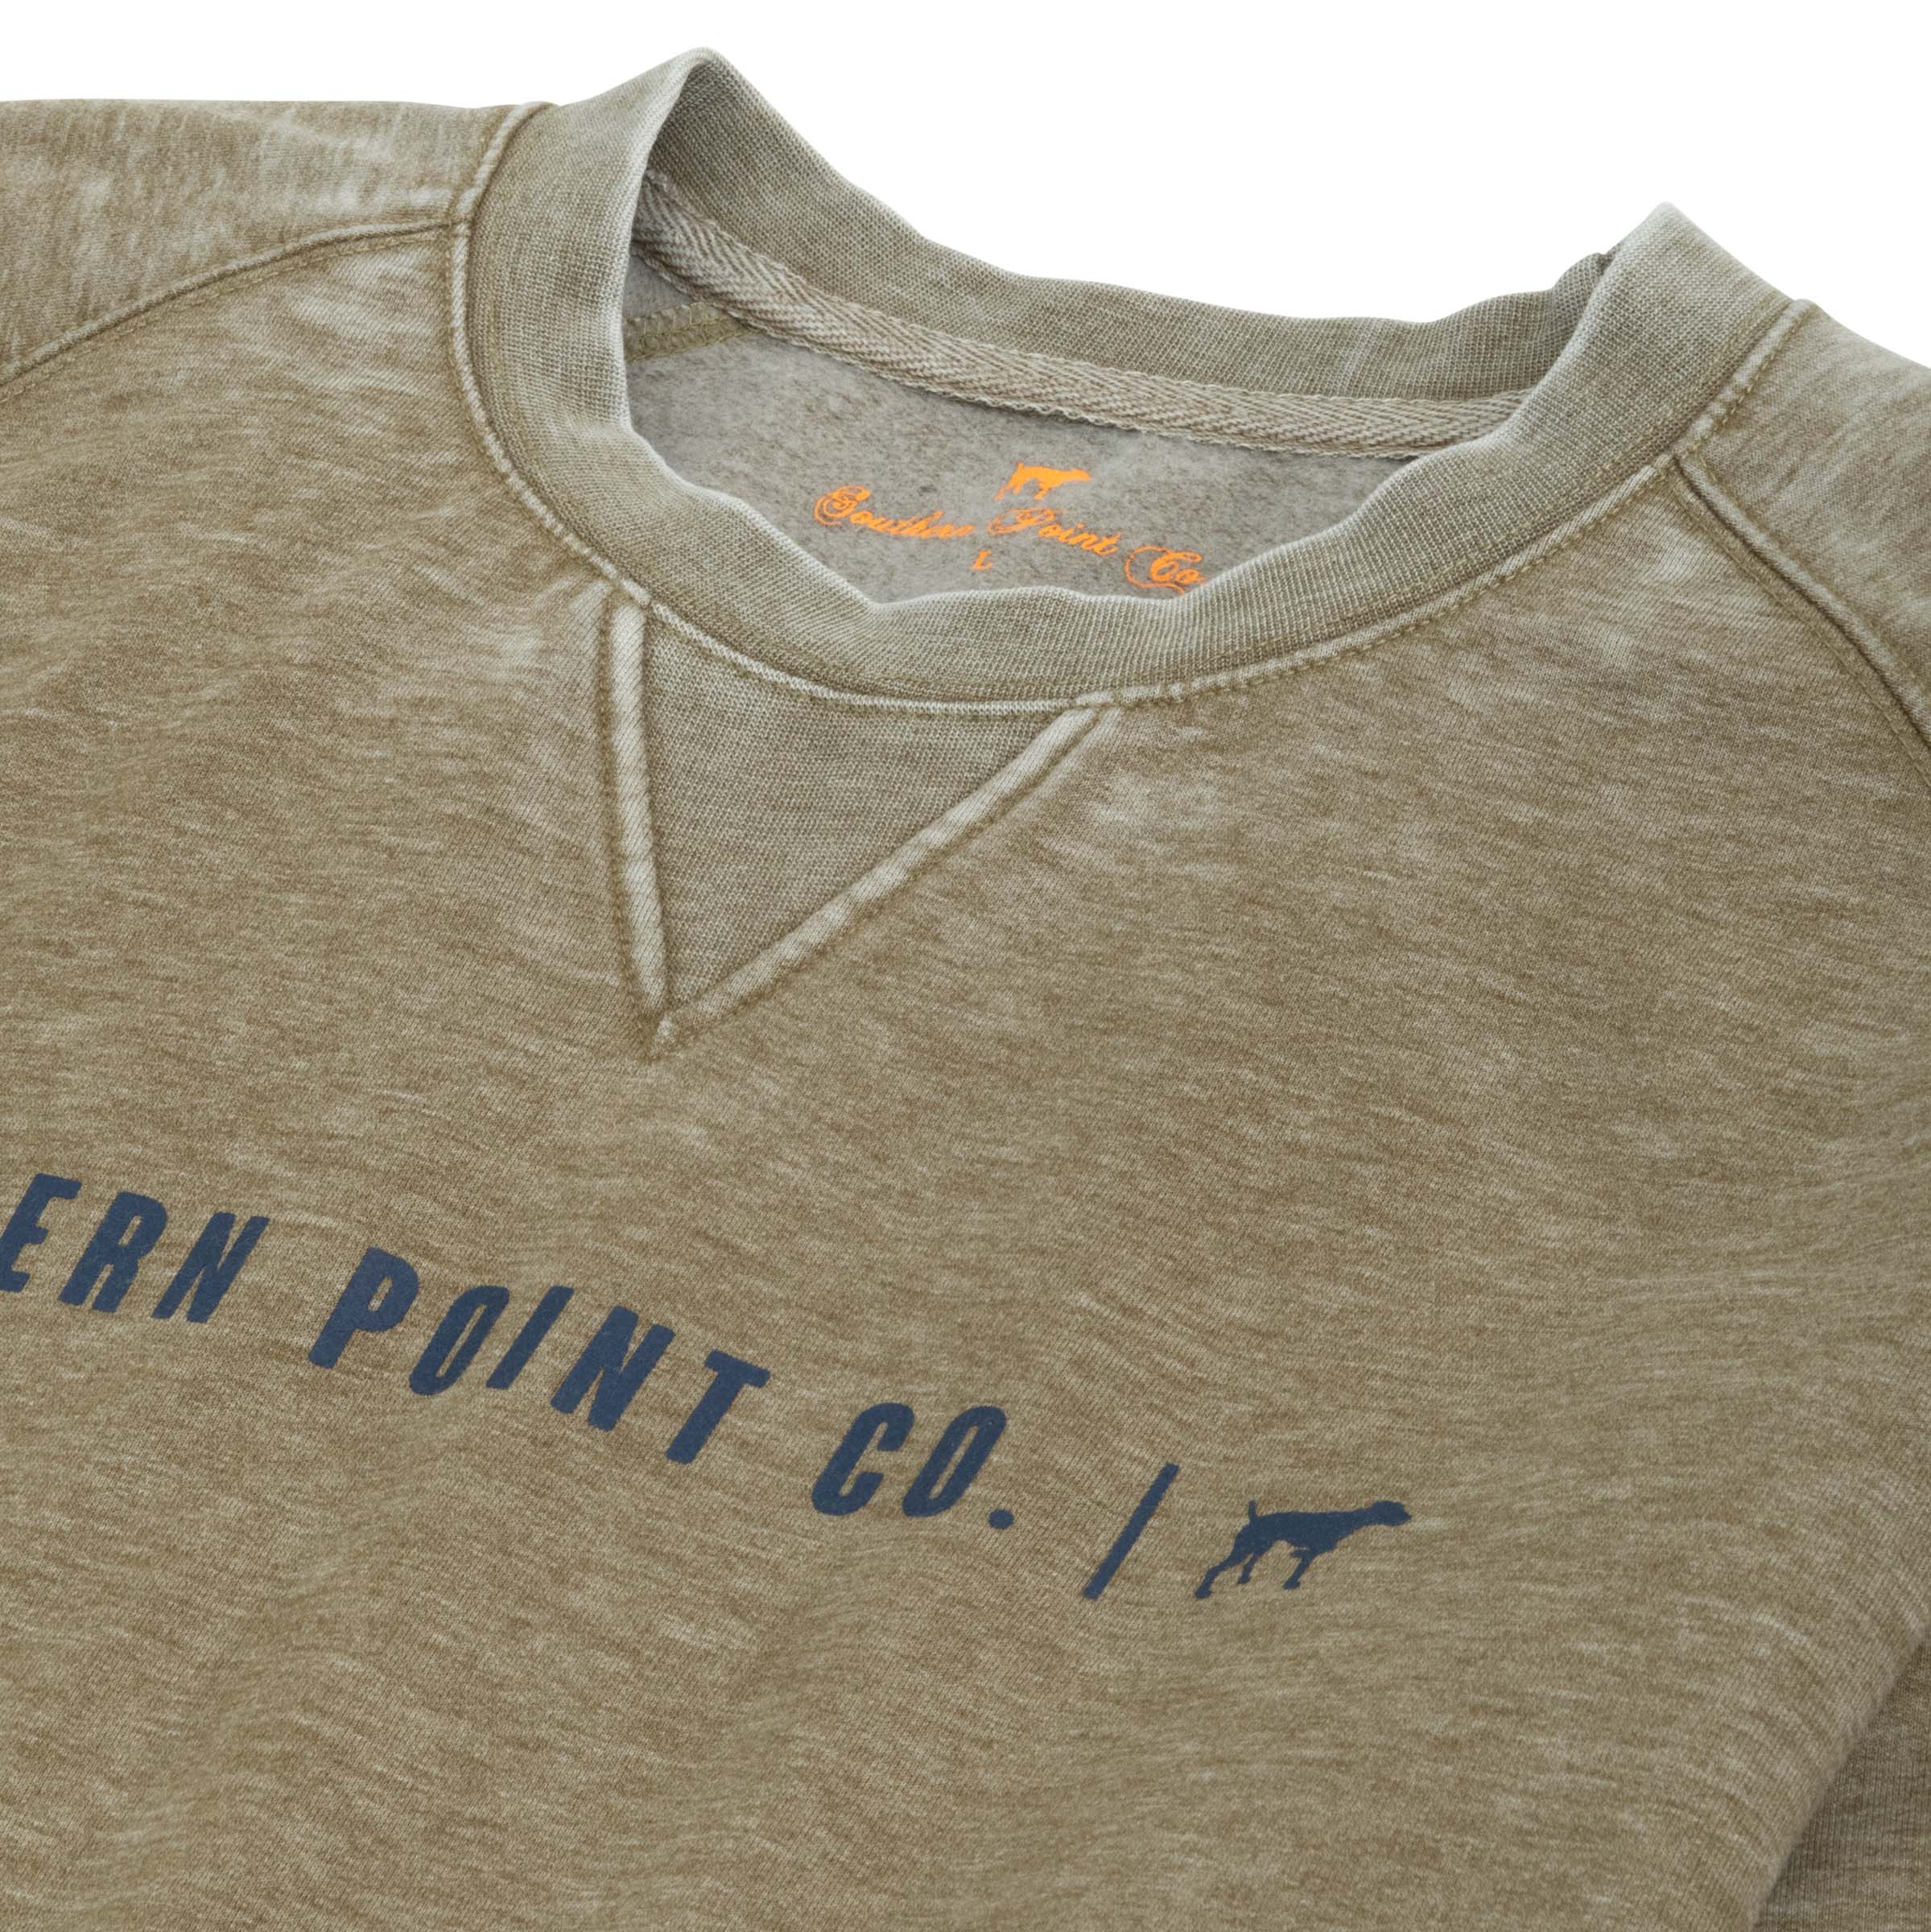 Kids & Boys' Lifestyle Clothing – Southern Point Co.